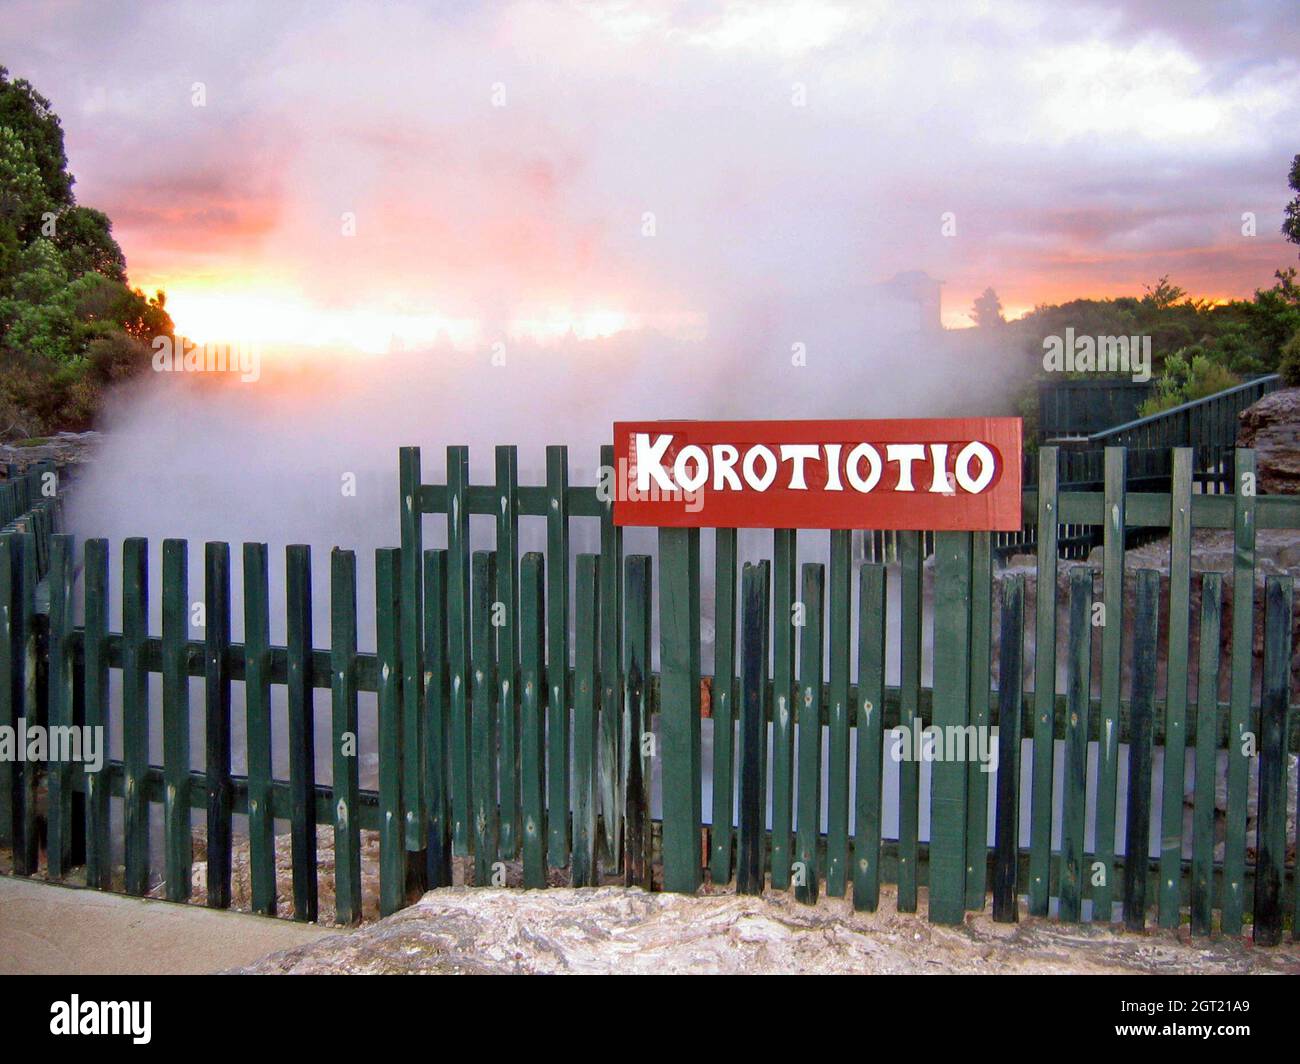 Korotiotio, known as Grumpy Man in English, is a volcanic hot spring in Whaka Village in Rotorua, New Zealand that is usually at boiling temperature. It was used for cooking until the 1870s when at the time a Maori woman fell in and died.  The hot spring has been kept sacred ever since. Stock Photo